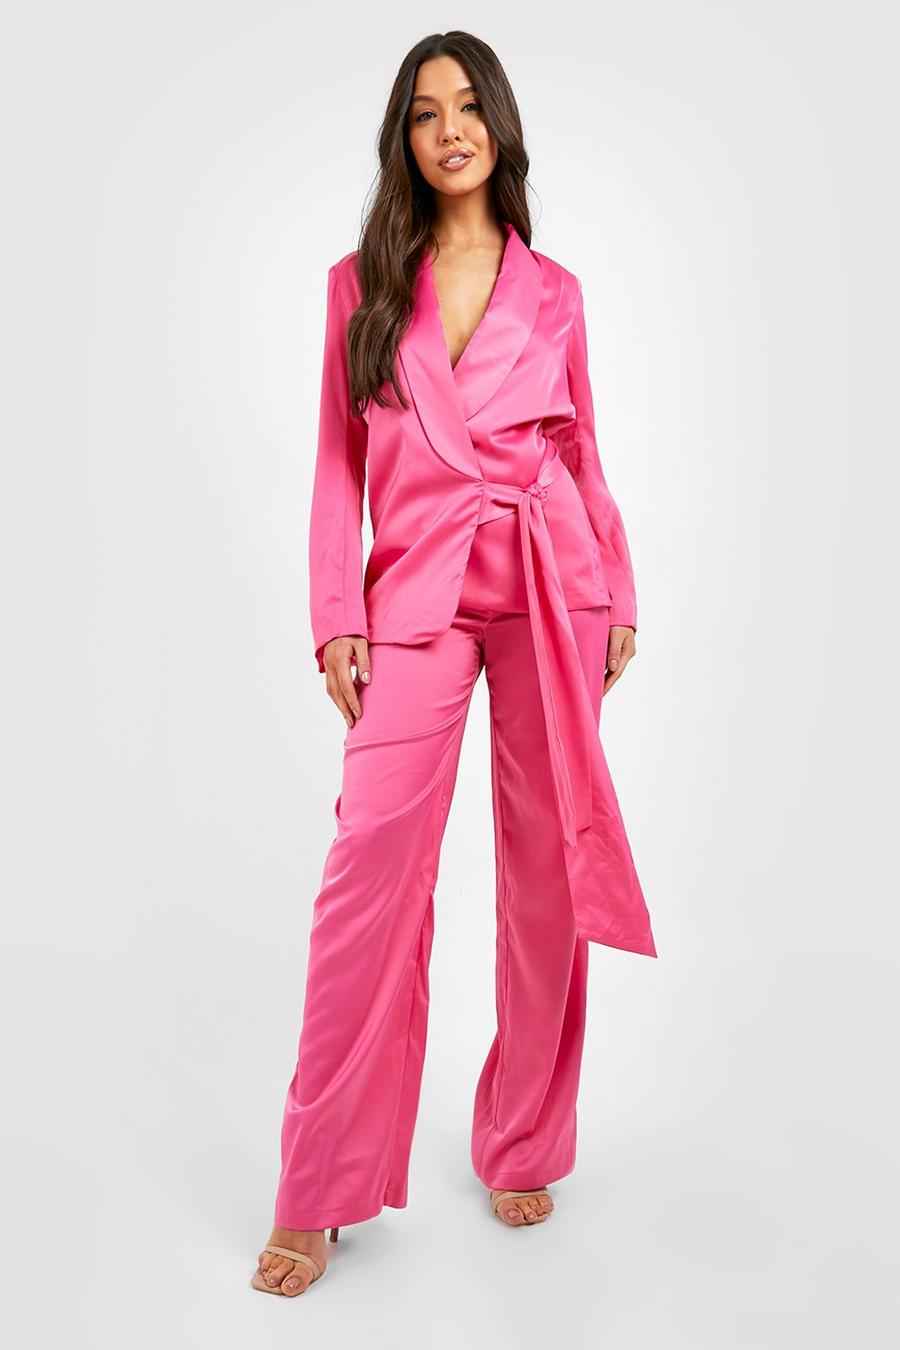 Rosie's Closet - 💧Wedding ready? girls night out? These trouser suits are  •Chic •Simple & •Elegant Featuring Straight trouser legs & Peplum detail  top 💧